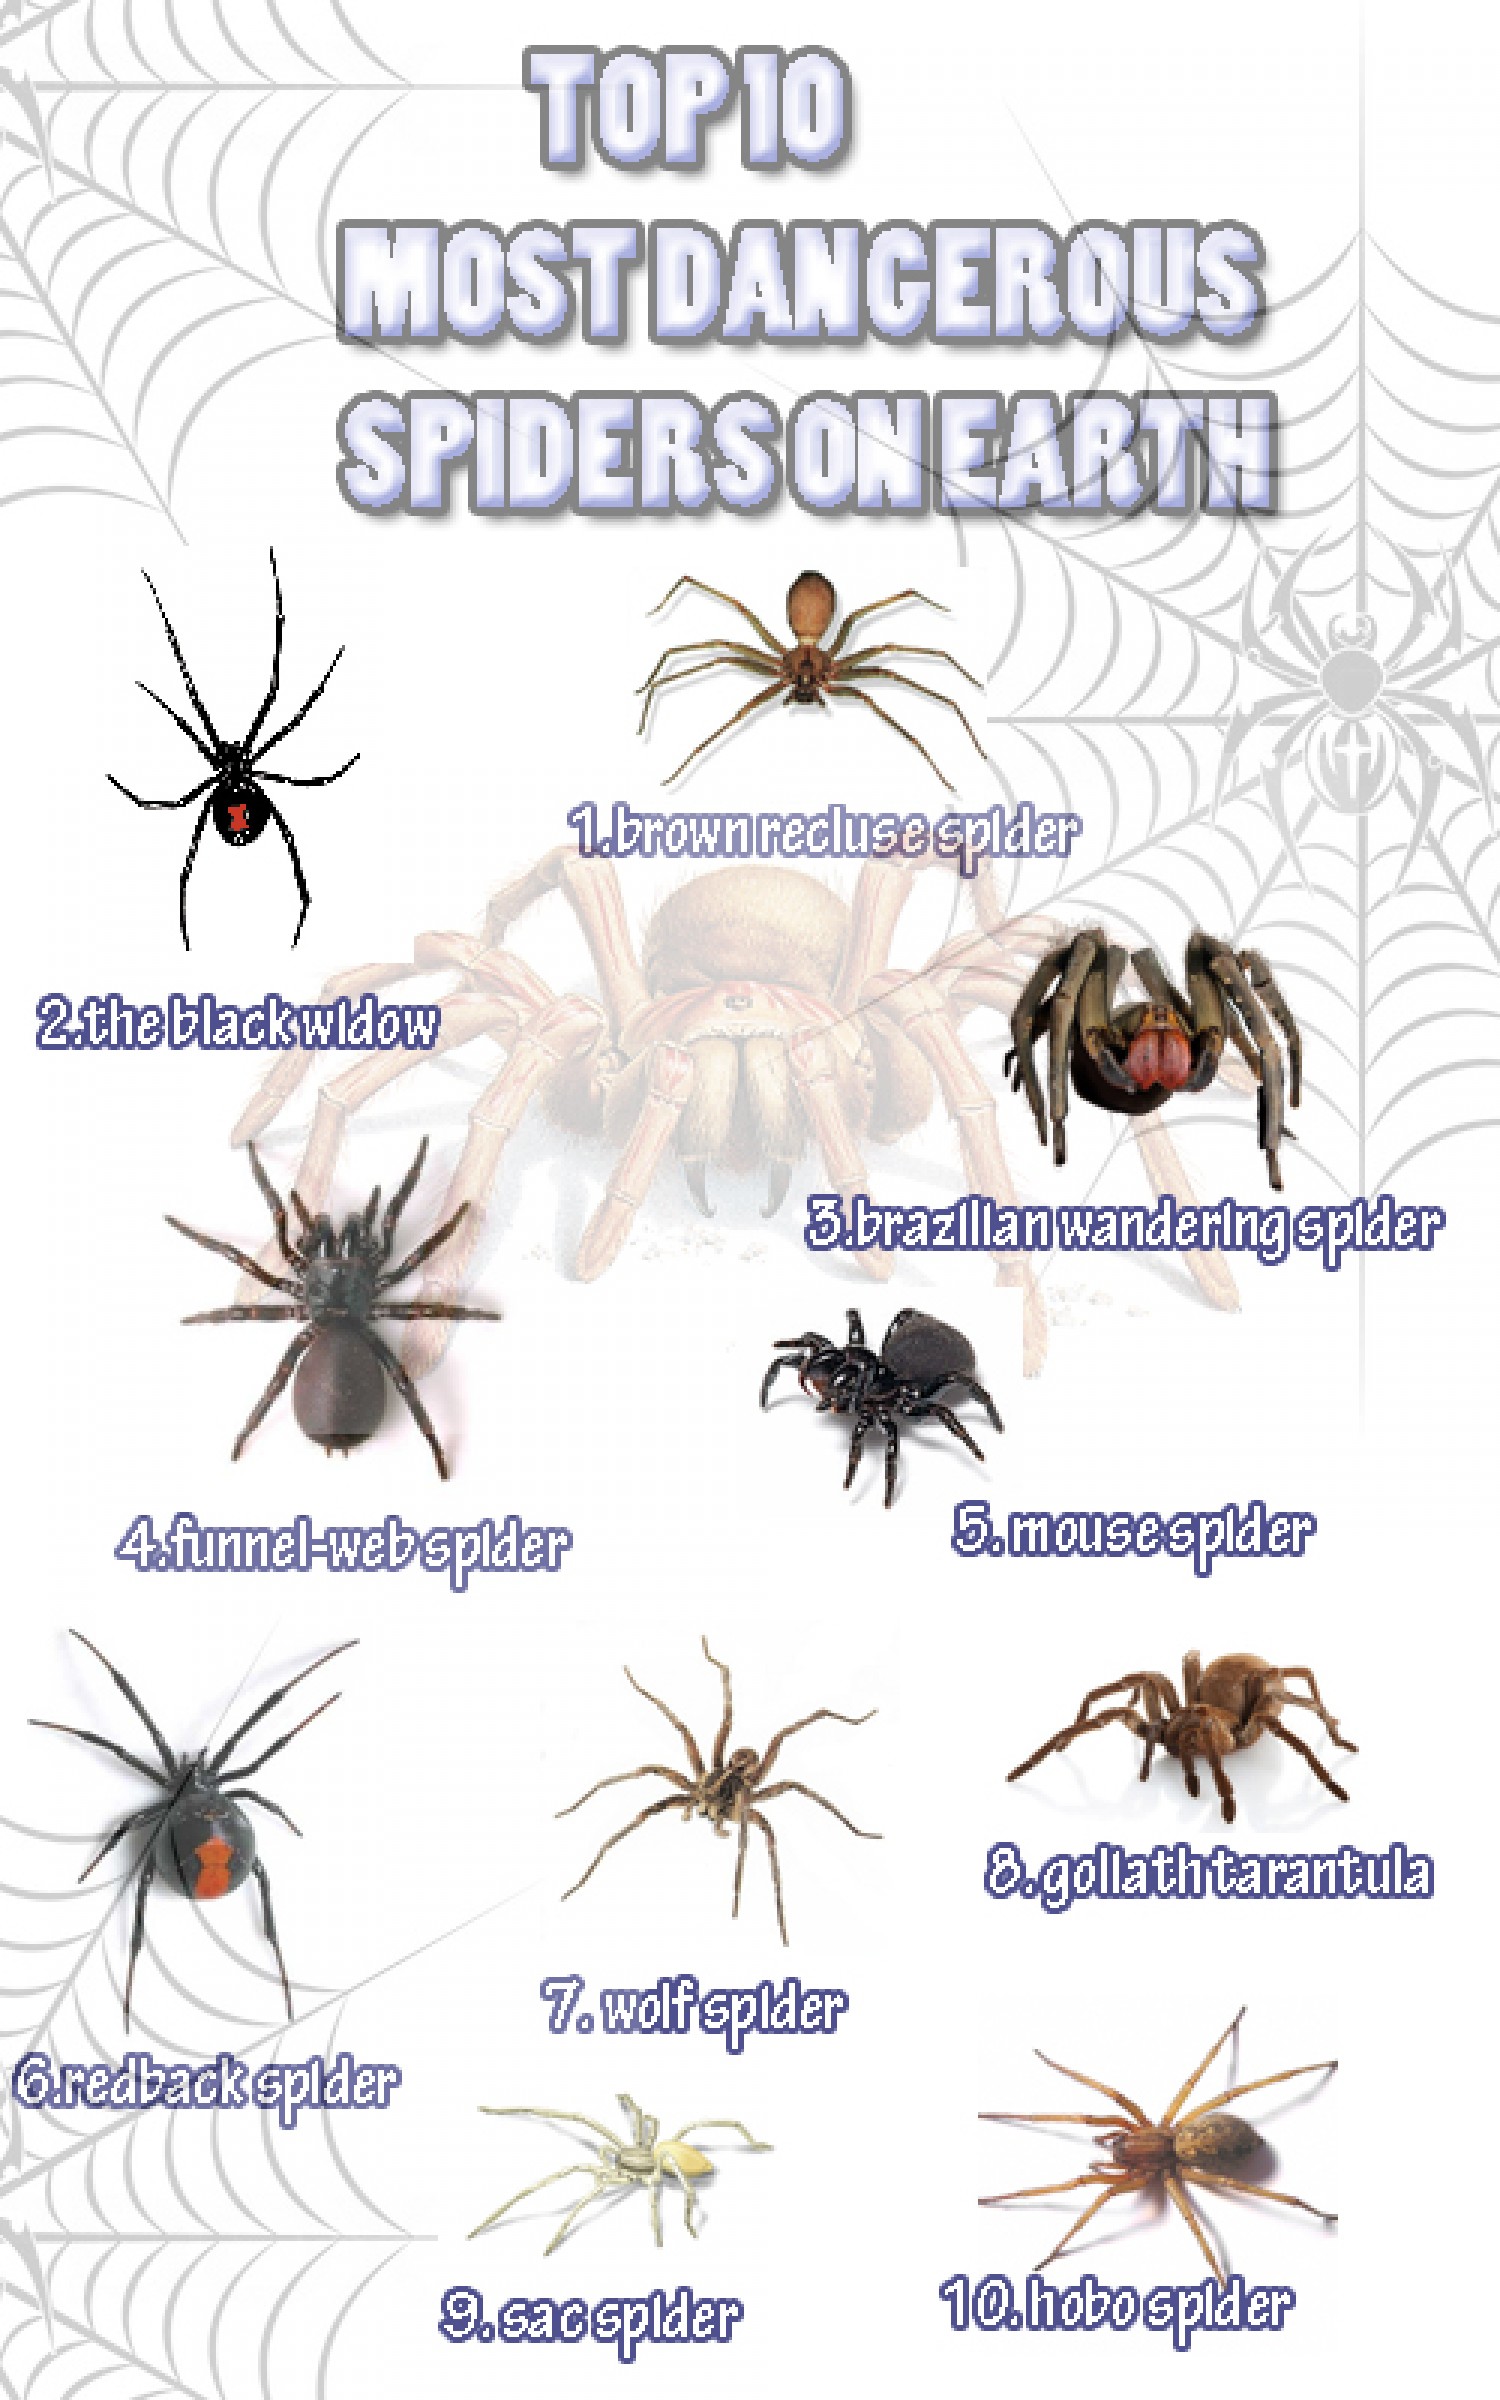 Top 10 Most Dangerous Spiders On Earth | Visual.ly